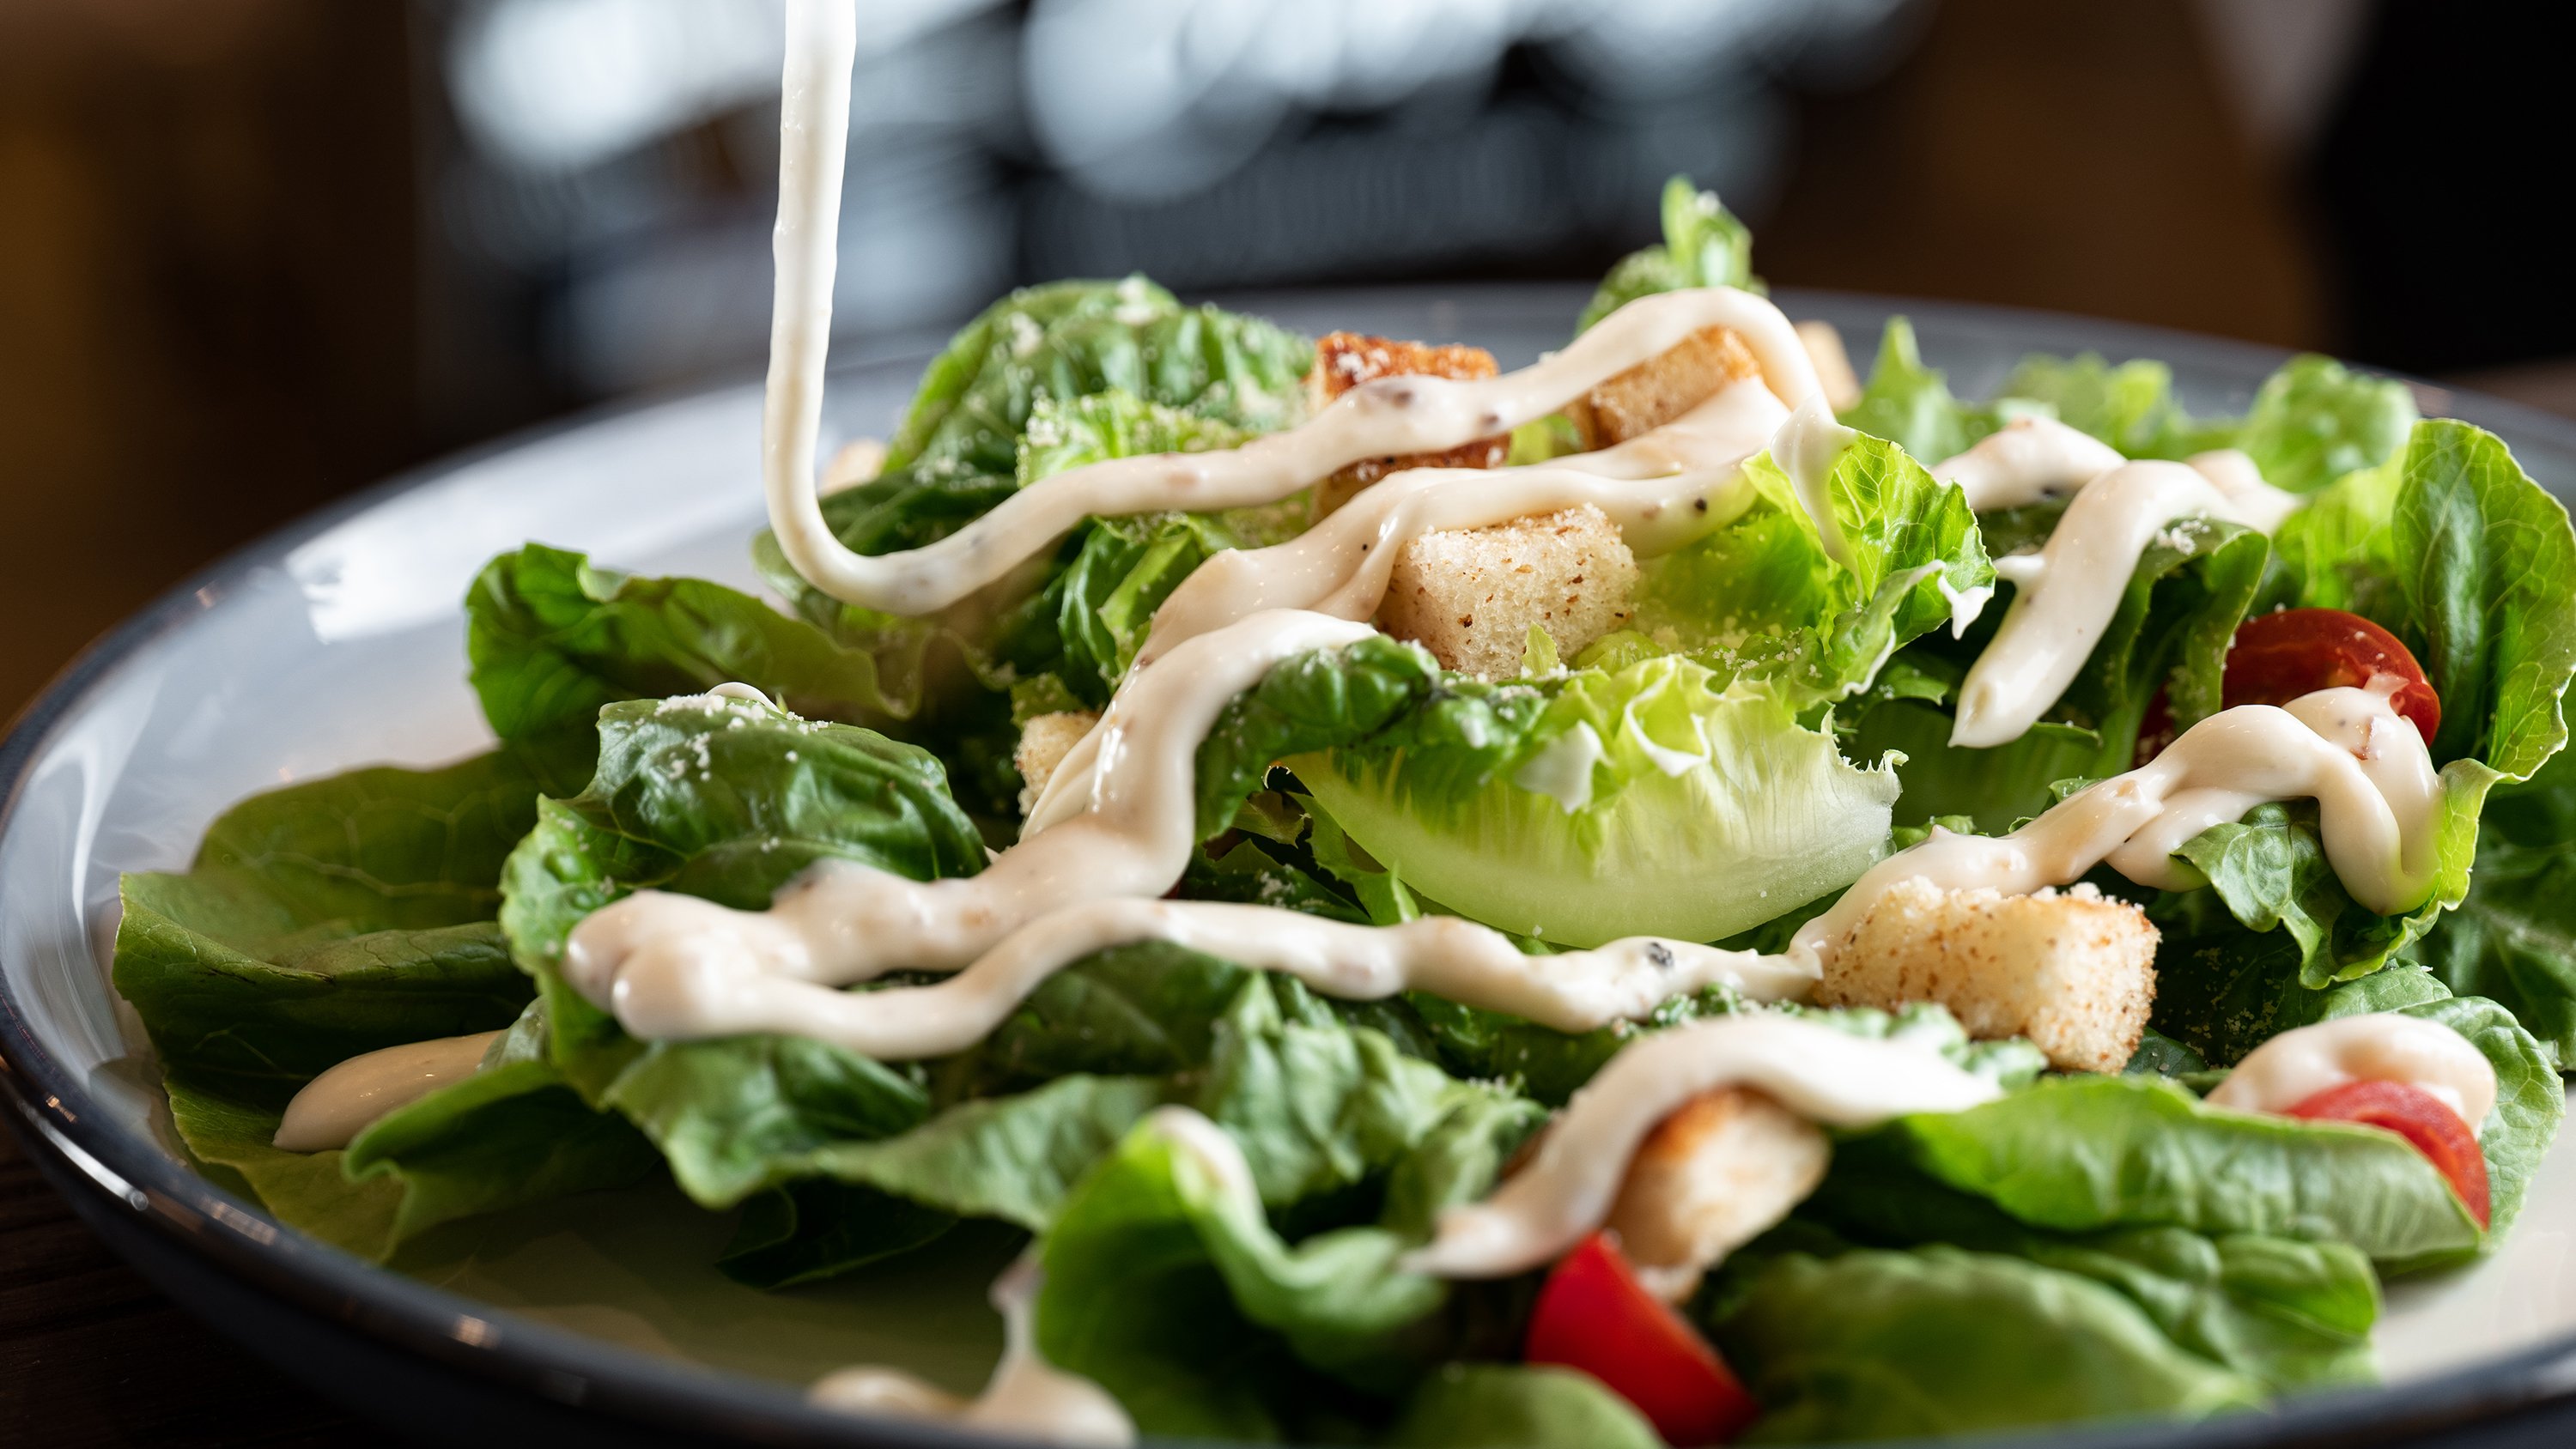 A plate with salad with dressing being poured on from above